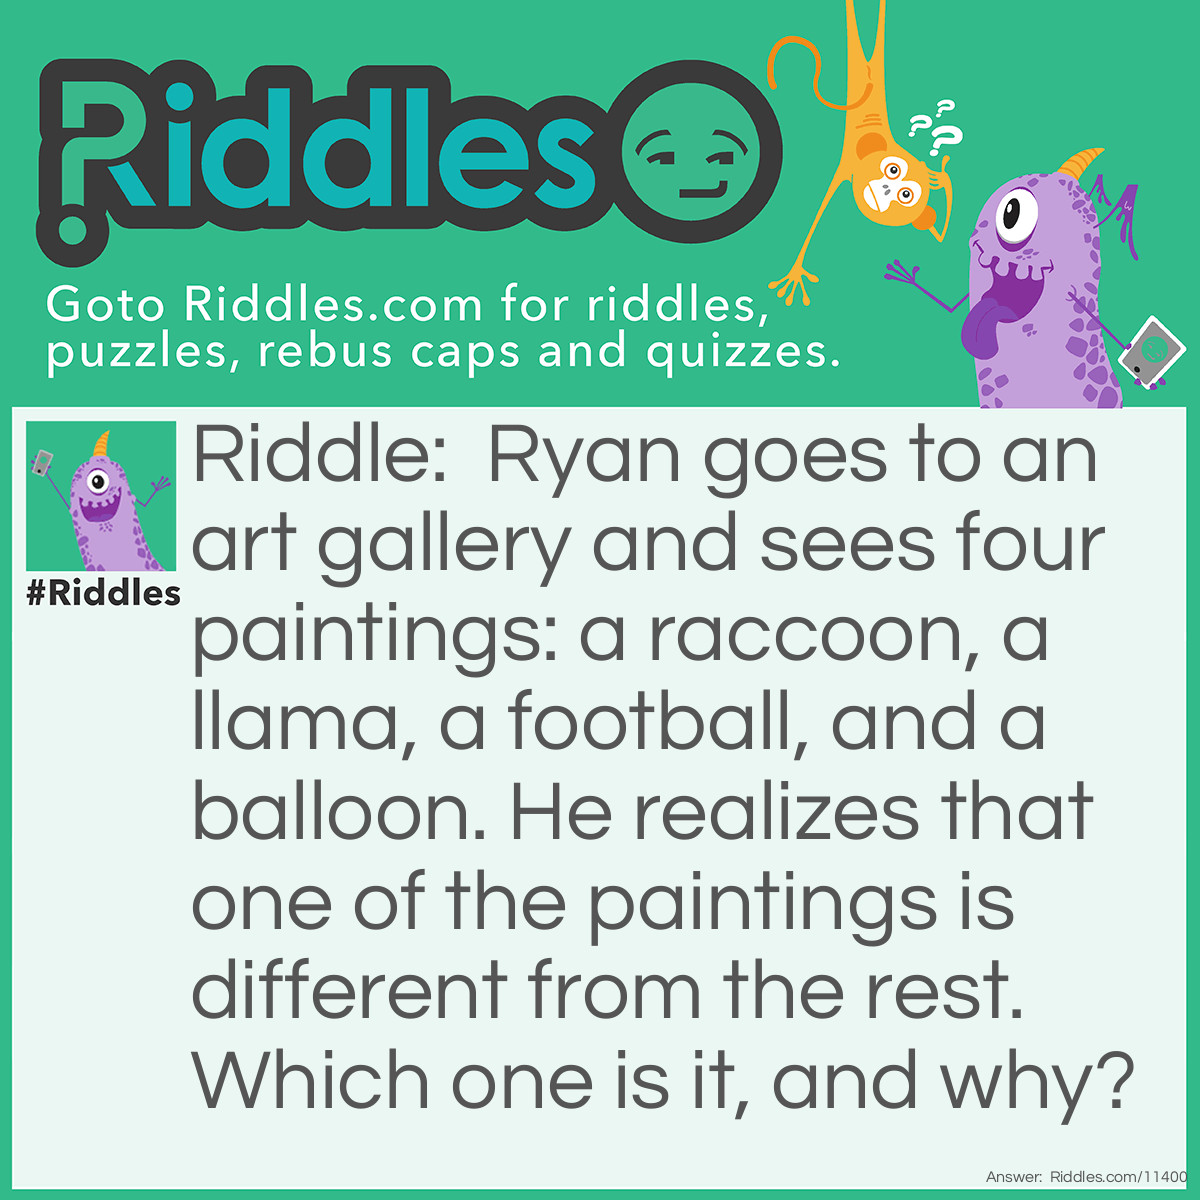 Riddle: Ryan goes to an art gallery and sees four paintings: a raccoon, a llama, a football, and a balloon. He realizes that one of the paintings is different from the rest. Which one is it, and why? Answer: The llama picture is different from the others because "llama" has just one double letter, while "raccoon", "football", and "balloon" all have two double letters.